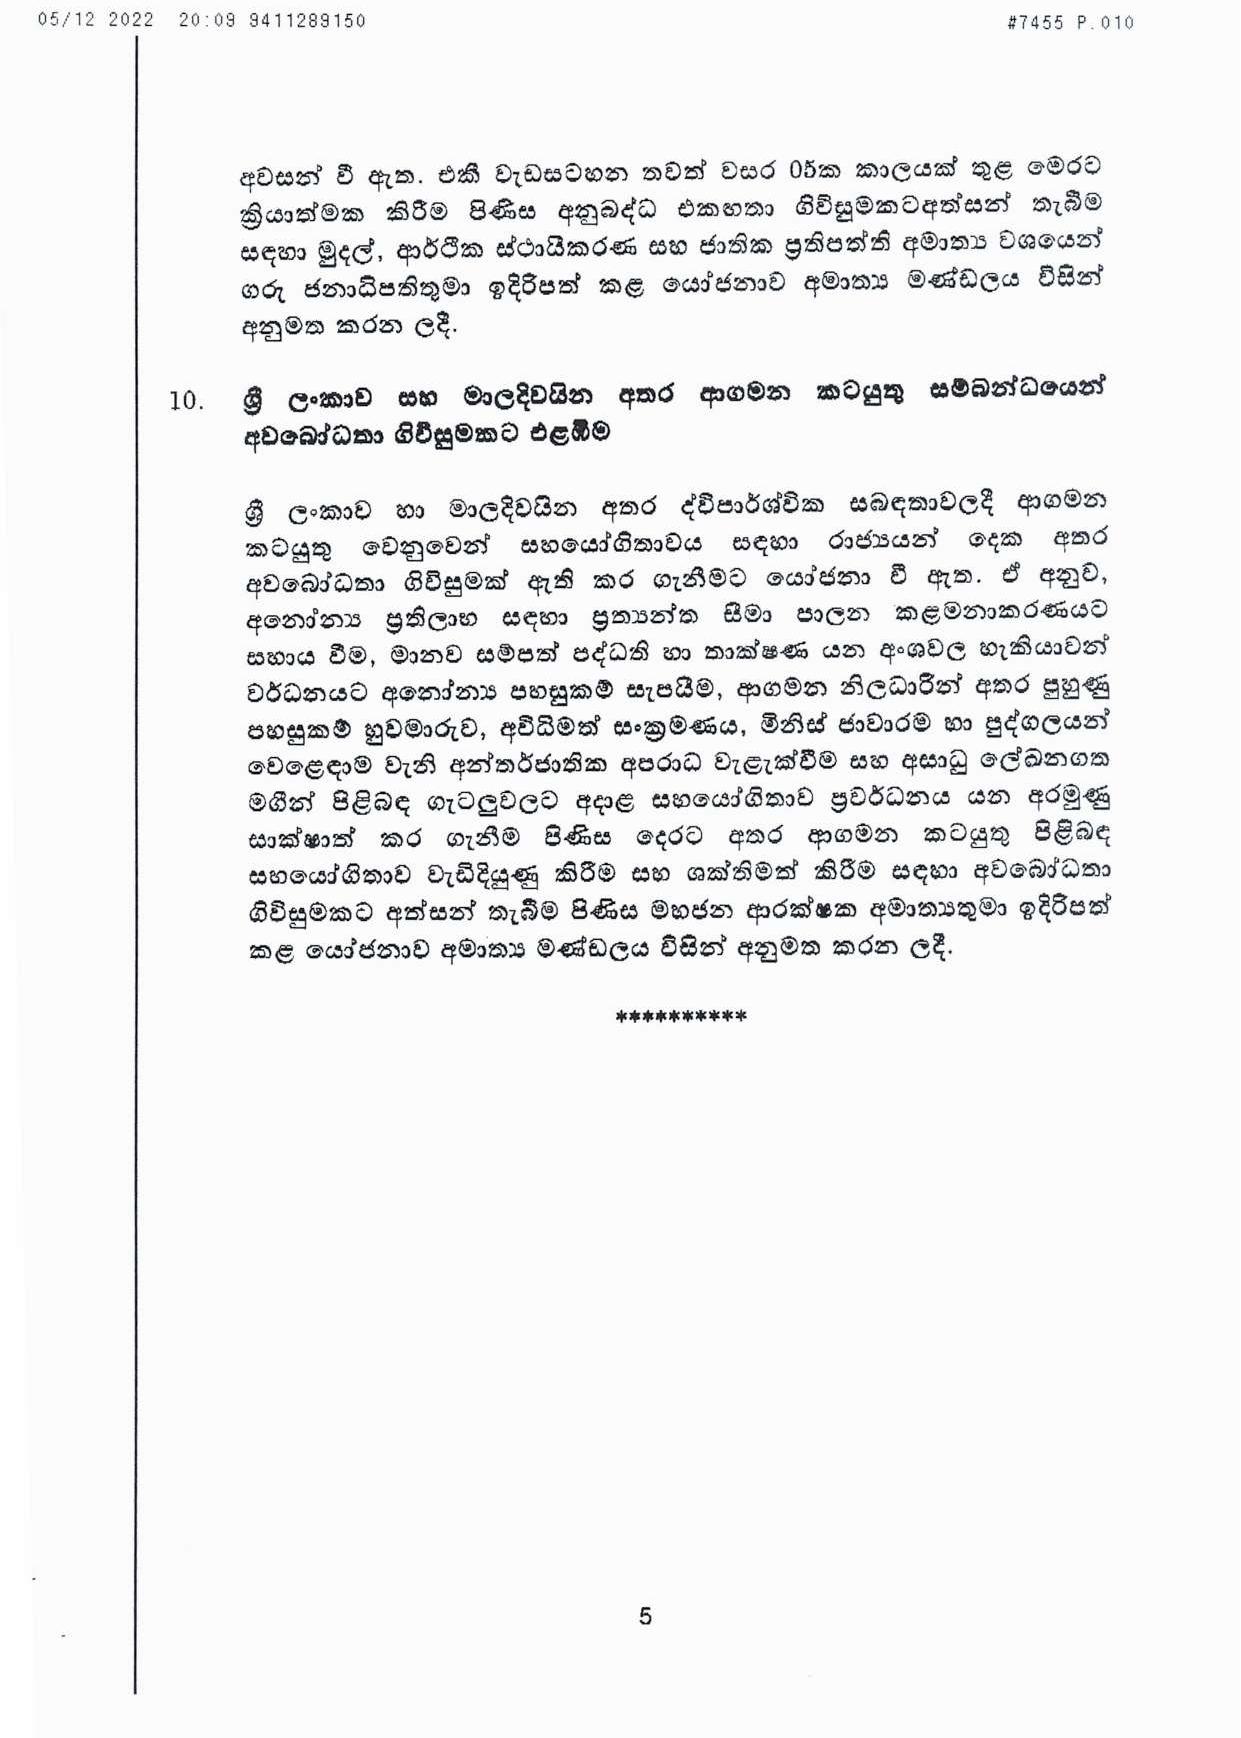 Cabinet Decisions on 05.12.2022 page 005